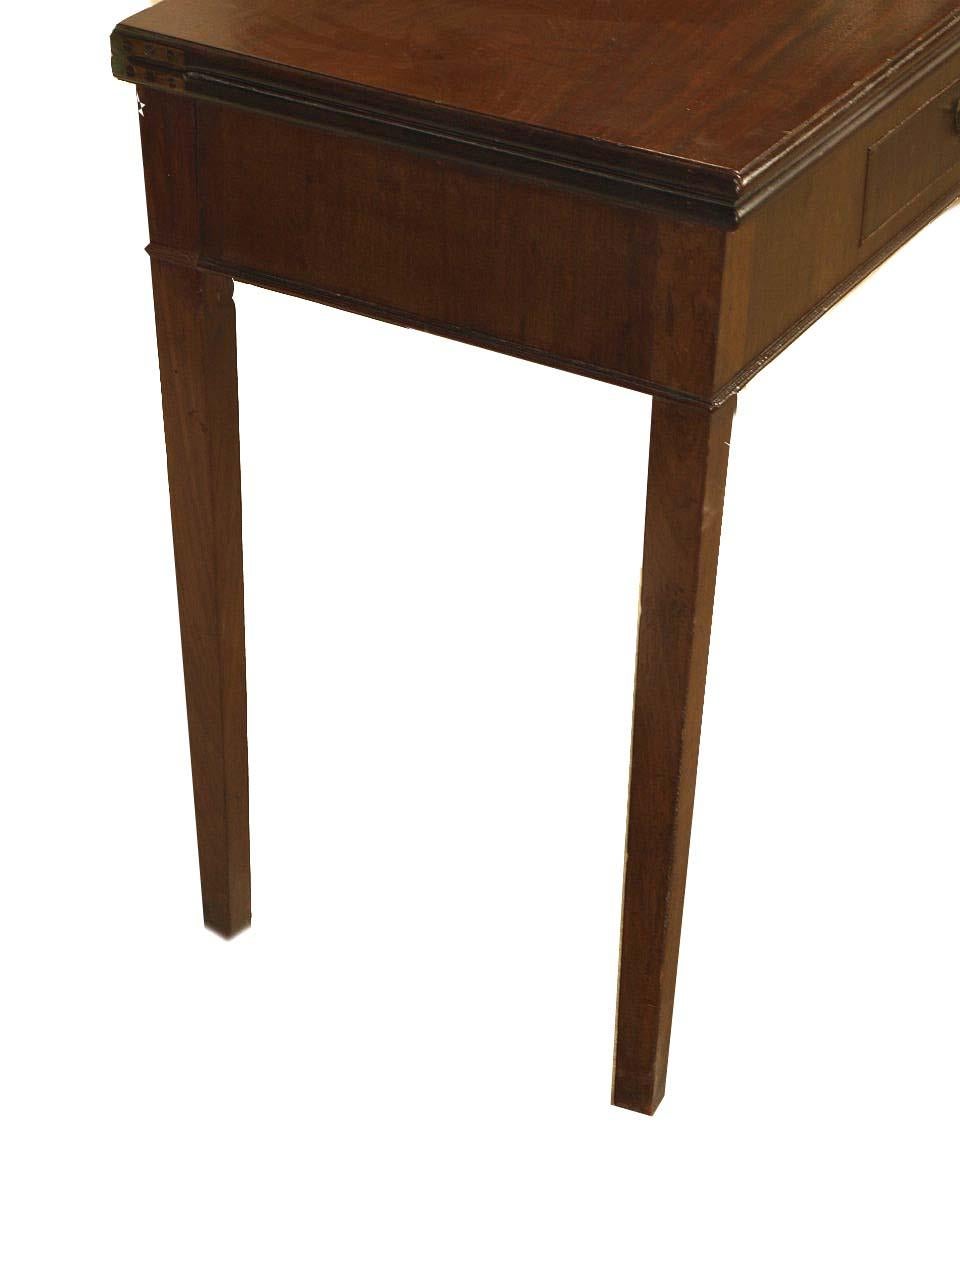 Hepplewhite mahogany game table, the hinged top folds over and is supported by the left rear leg that swings out. Beautiful mahogany playing surface above single drawer with original swan neck brass pull. This table with tapered legs has excellent